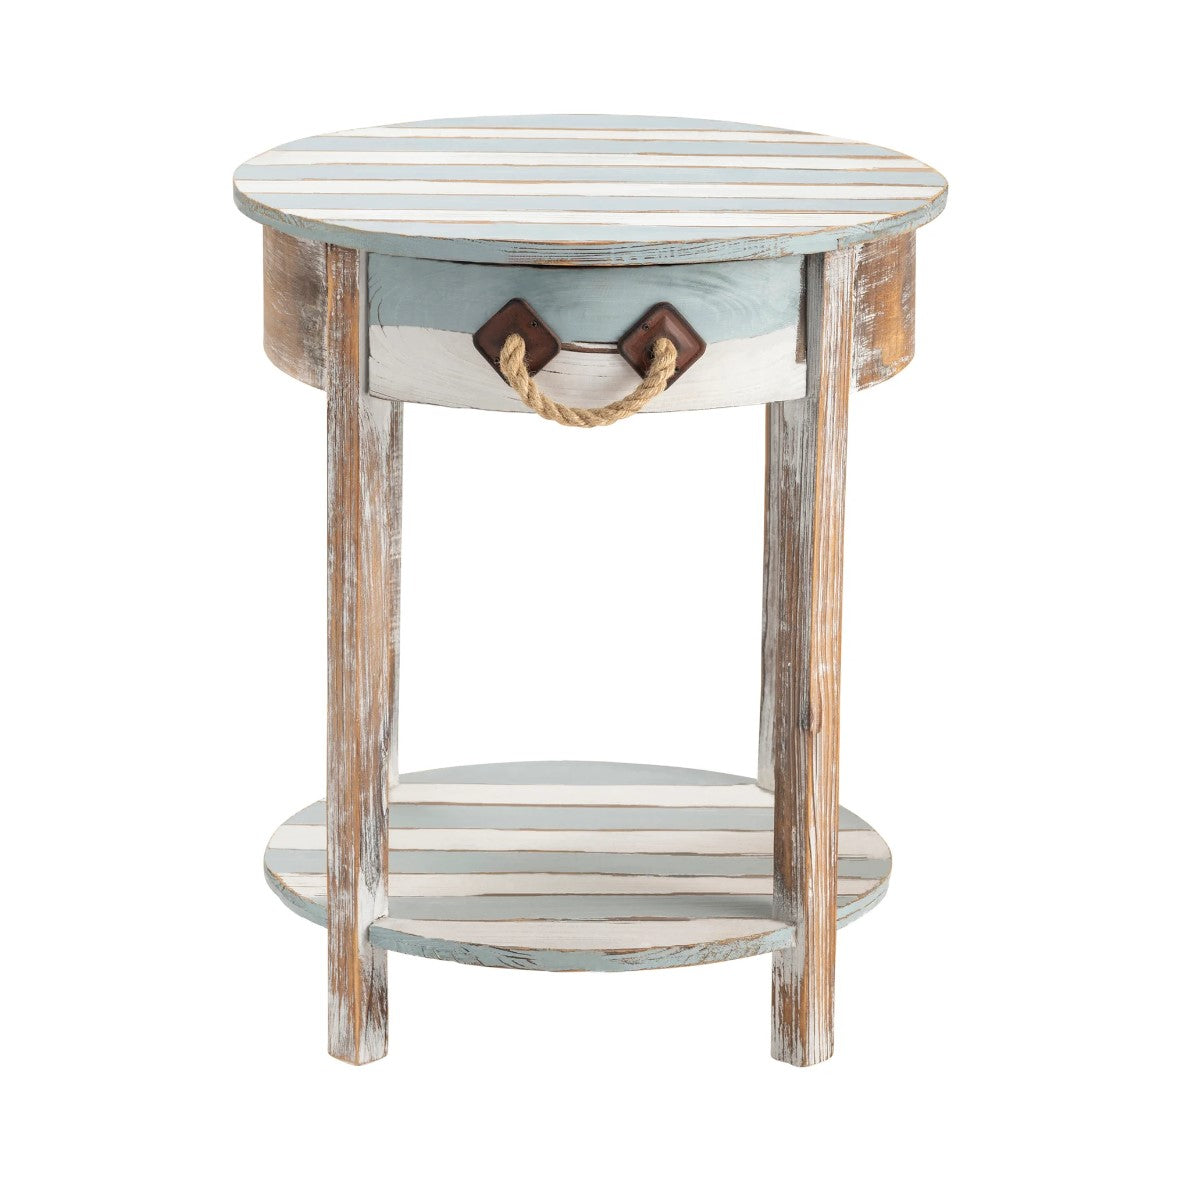 Crestview Collection Nantucket 20" x 20" x 24" 1-Drawer Coastal Wood And Rope Accent Table In Weathered Wood Finish